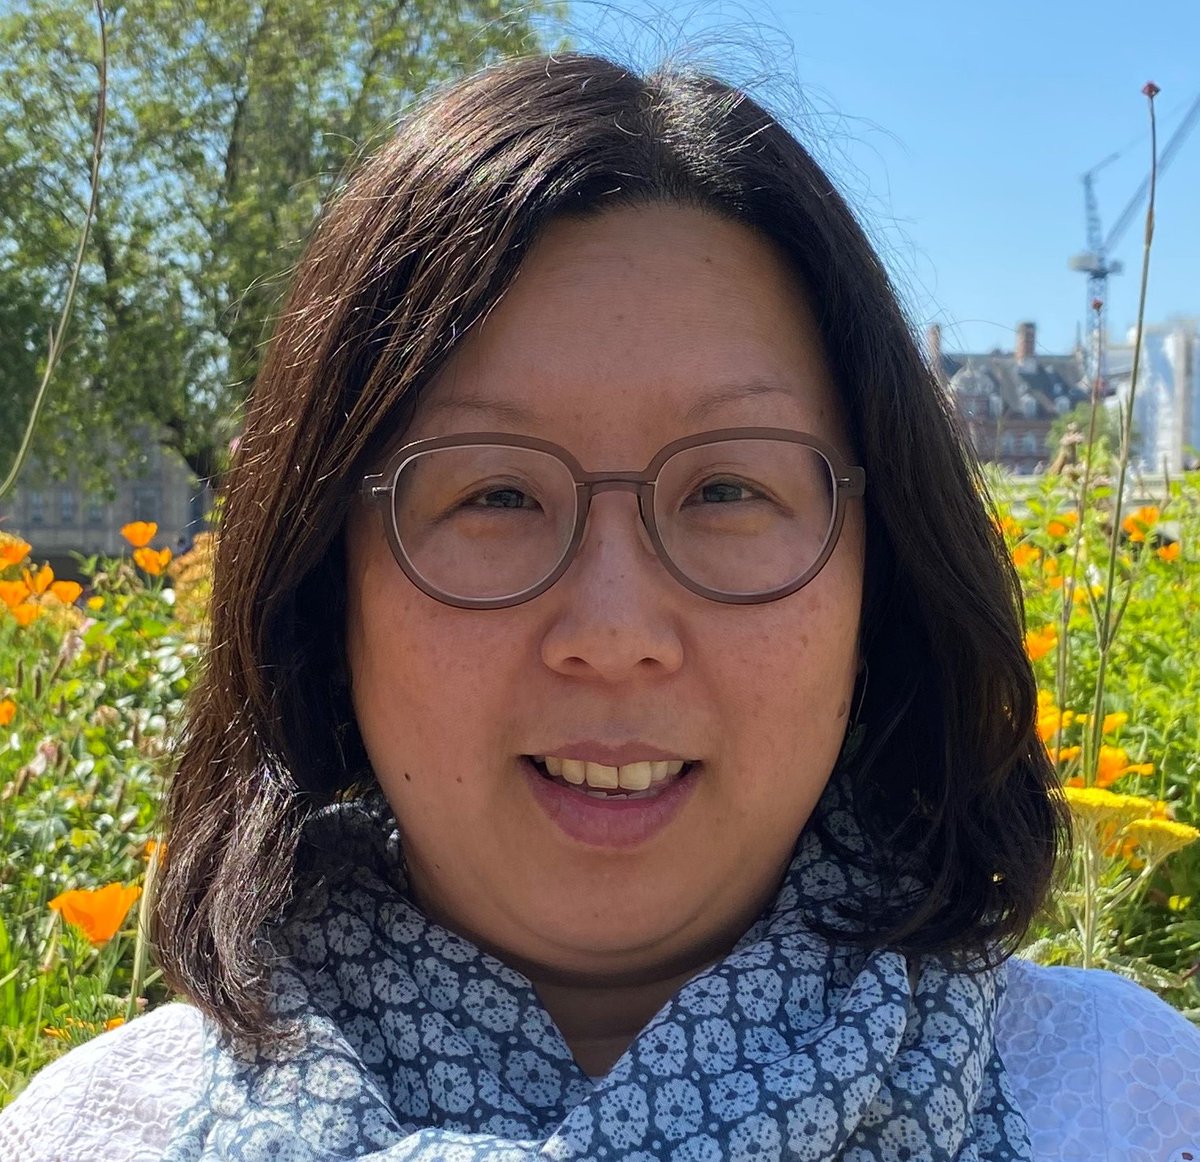 Congratulations to our lead research pharmacist Mandy Wan on selection as a member of the national Pharmacy Research Advisory Group (PRAG) hosted by NHS England. The process was highly competitive but Mandy's qualifications and experience stood out. evelinalondon.nhs.uk/about-us/who-w…